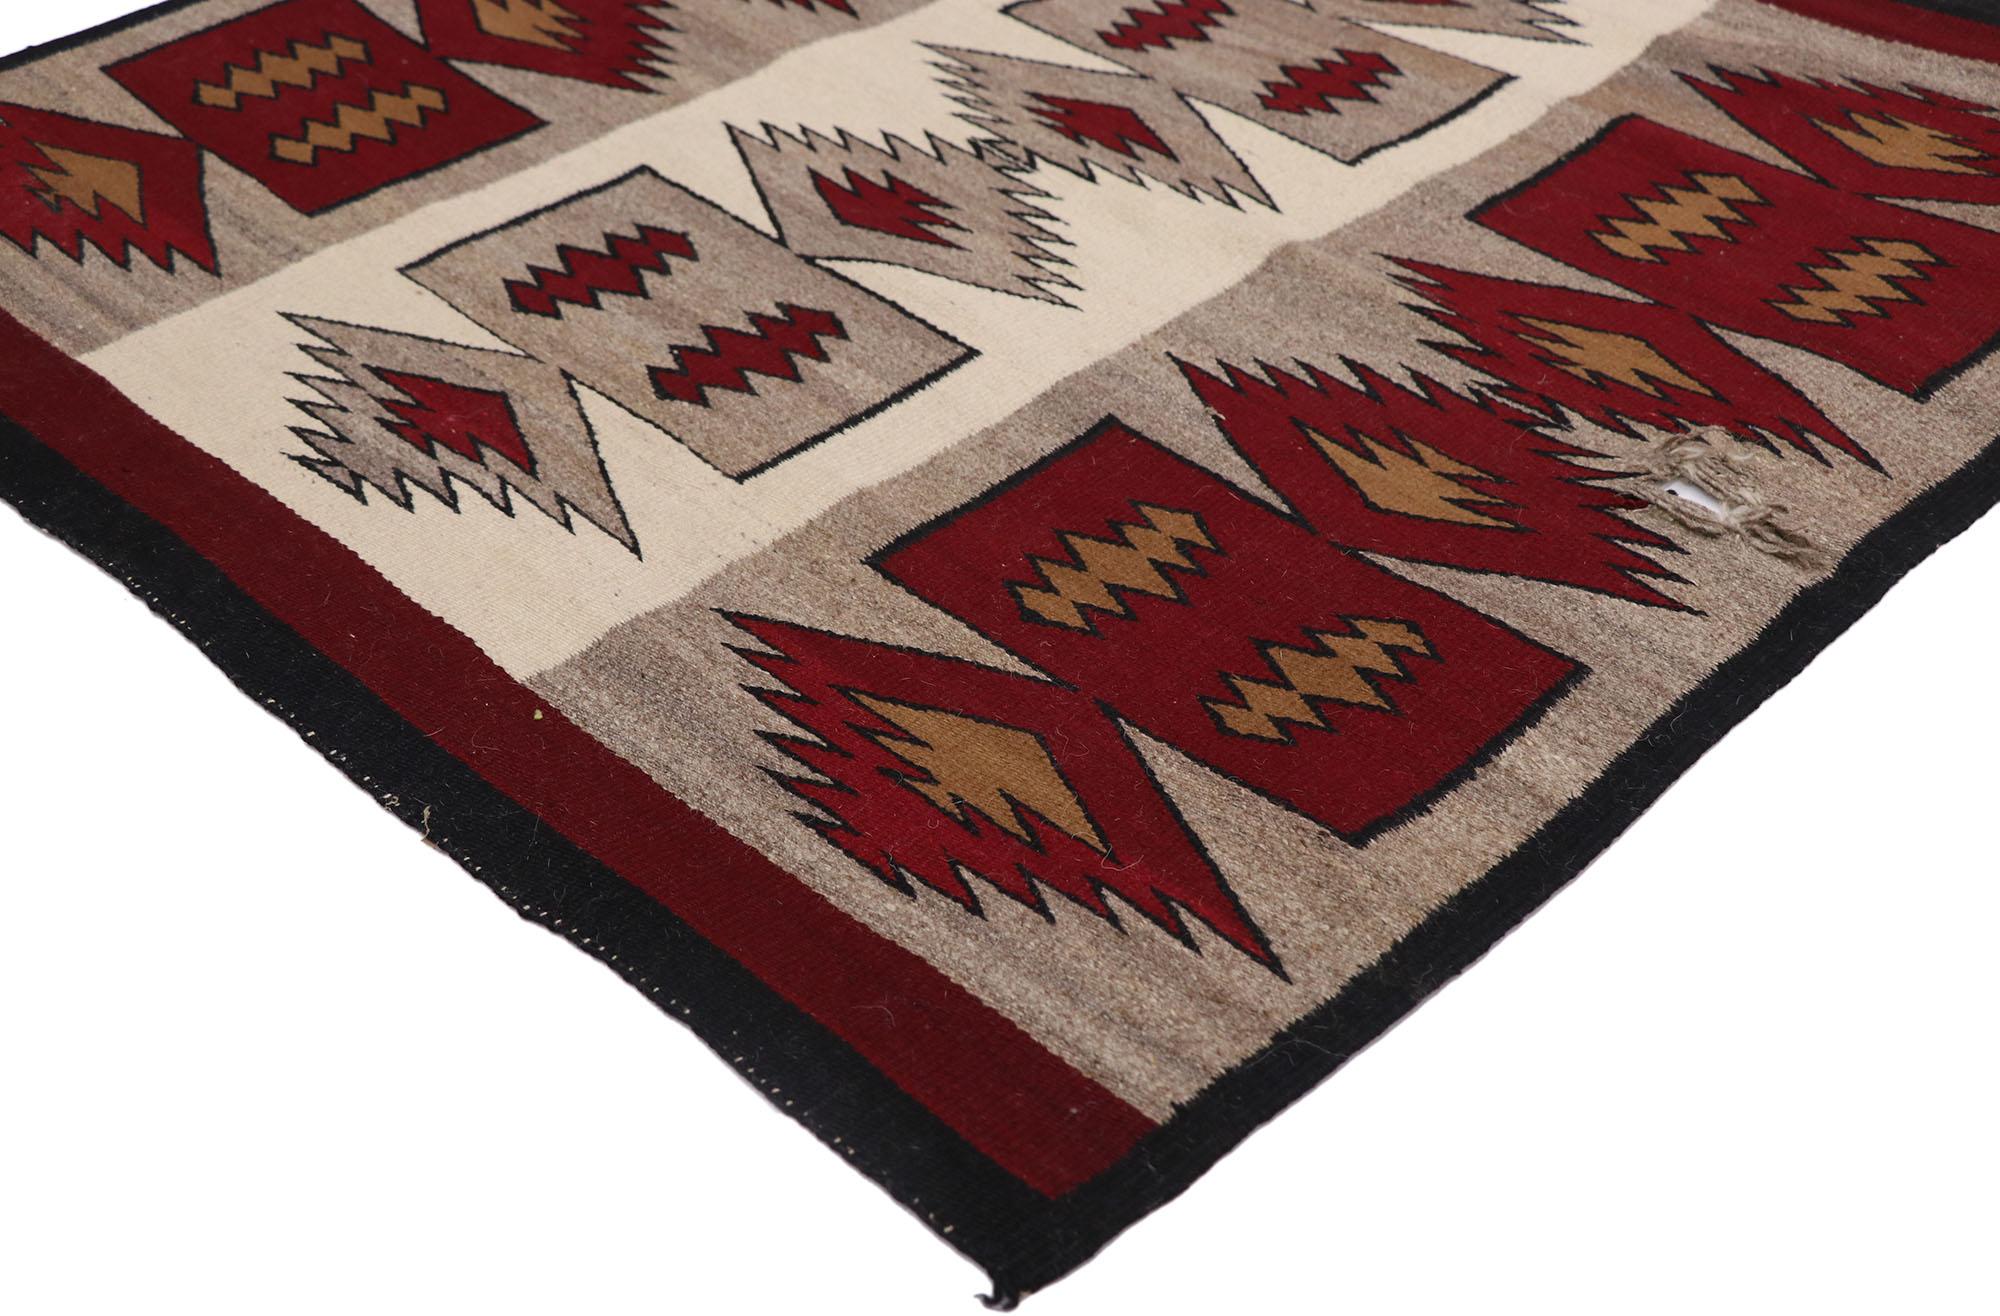 78134 Vintage Navajo Blanket rug, 03'03 x 03'03. With its incredible detail and texture, this handwoven vintage Navajo rug is a captivating vision of woven beauty. The striking tribal pattern and earthy colorway woven into this Navajo rug work